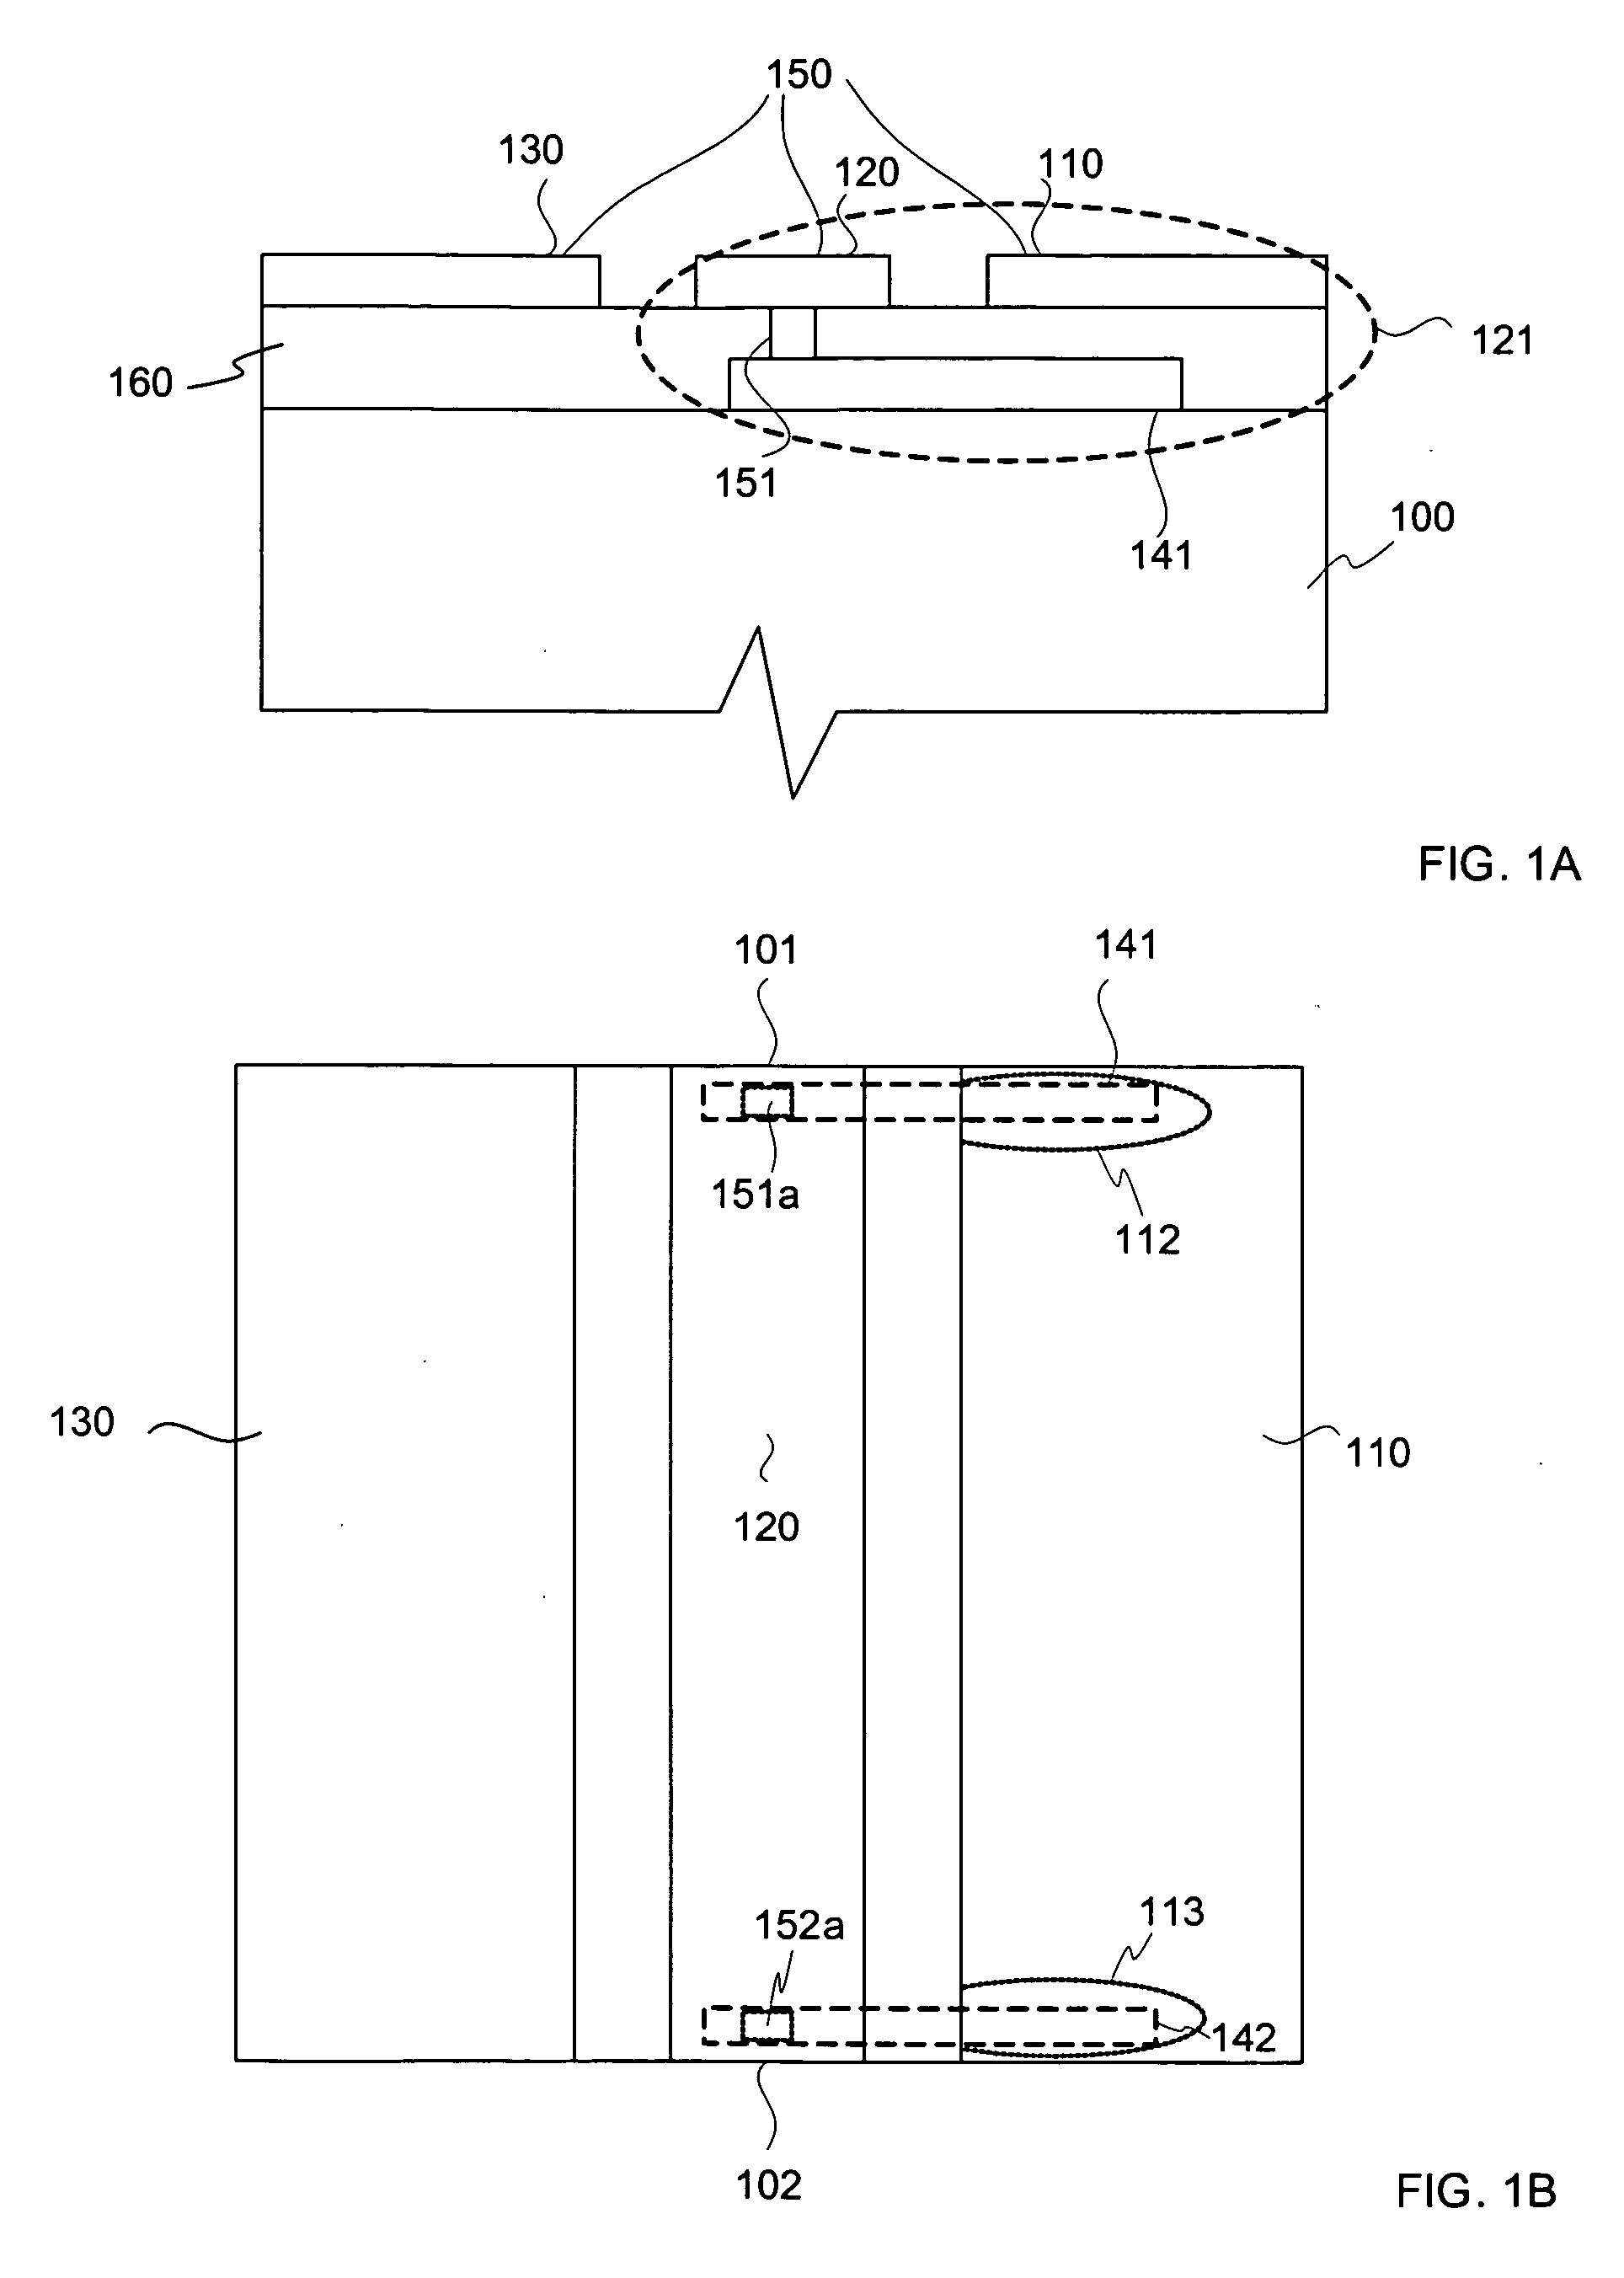 Reduced size transmission line using capacitive loading